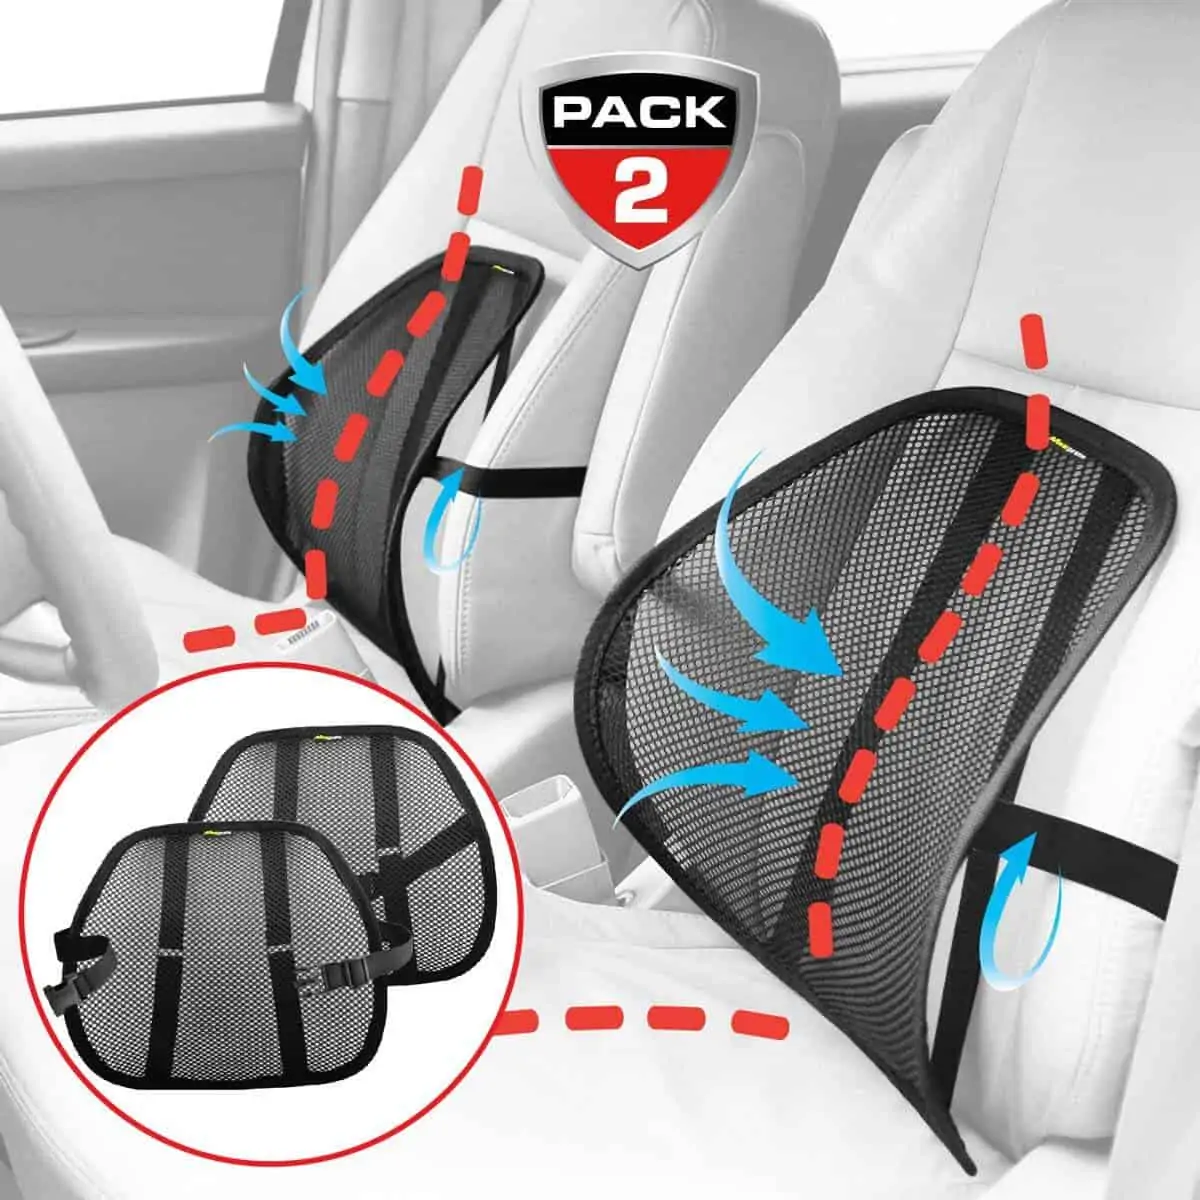 9+ Best Lumbar Support For Car Options & Why They Work